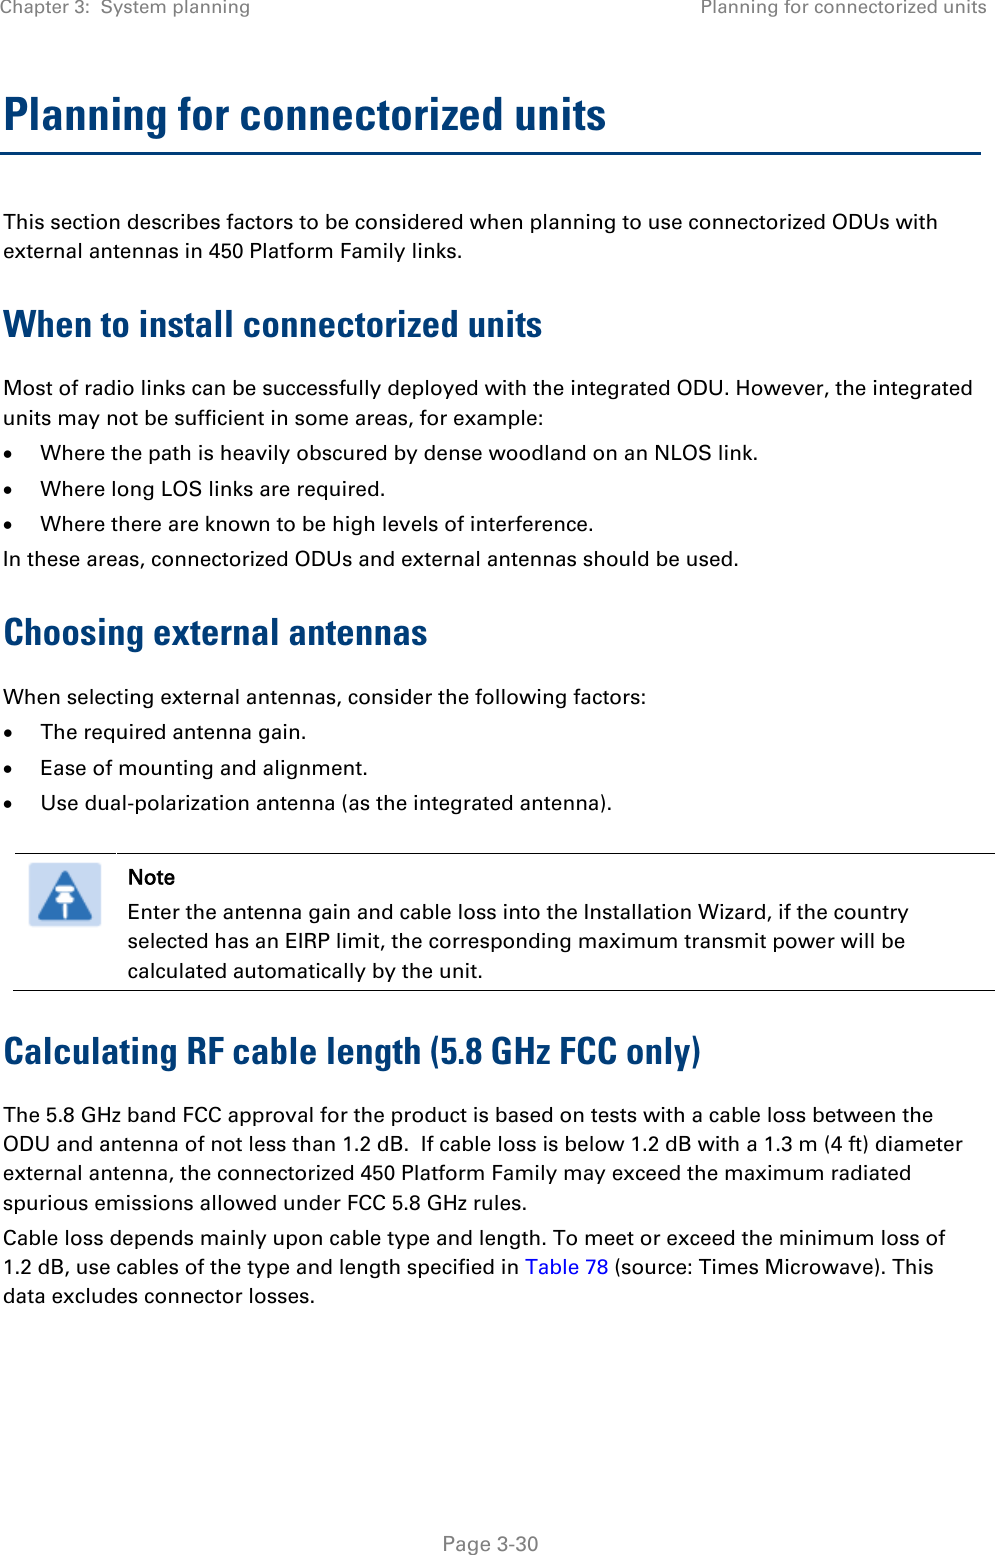 Chapter 3:  System planning Planning for connectorized units   Page 3-30 Planning for connectorized units This section describes factors to be considered when planning to use connectorized ODUs with external antennas in 450 Platform Family links. When to install connectorized units Most of radio links can be successfully deployed with the integrated ODU. However, the integrated units may not be sufficient in some areas, for example: • Where the path is heavily obscured by dense woodland on an NLOS link. • Where long LOS links are required.  • Where there are known to be high levels of interference. In these areas, connectorized ODUs and external antennas should be used. Choosing external antennas When selecting external antennas, consider the following factors: • The required antenna gain. • Ease of mounting and alignment. • Use dual-polarization antenna (as the integrated antenna).   Note Enter the antenna gain and cable loss into the Installation Wizard, if the country selected has an EIRP limit, the corresponding maximum transmit power will be calculated automatically by the unit. Calculating RF cable length (5.8 GHz FCC only) The 5.8 GHz band FCC approval for the product is based on tests with a cable loss between the ODU and antenna of not less than 1.2 dB.  If cable loss is below 1.2 dB with a 1.3 m (4 ft) diameter external antenna, the connectorized 450 Platform Family may exceed the maximum radiated spurious emissions allowed under FCC 5.8 GHz rules. Cable loss depends mainly upon cable type and length. To meet or exceed the minimum loss of 1.2 dB, use cables of the type and length specified in Table 78 (source: Times Microwave). This data excludes connector losses.  